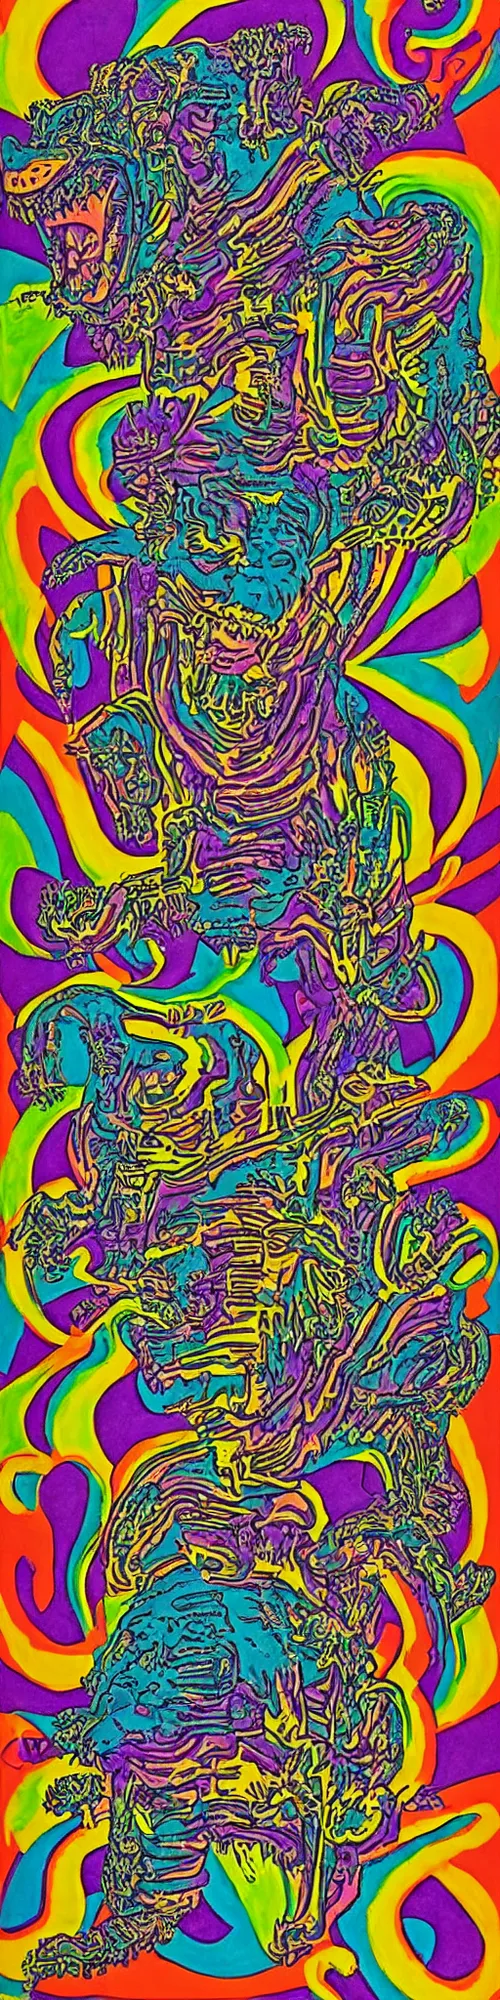 Prompt: tony the tiger dissolving into neon cereal pieces, cubensis, aztec, basil wolverton, r crumb, hr giger, mc escher, dali, picasso, muted but vibrant colors, subtle undulations, rainbow tubing